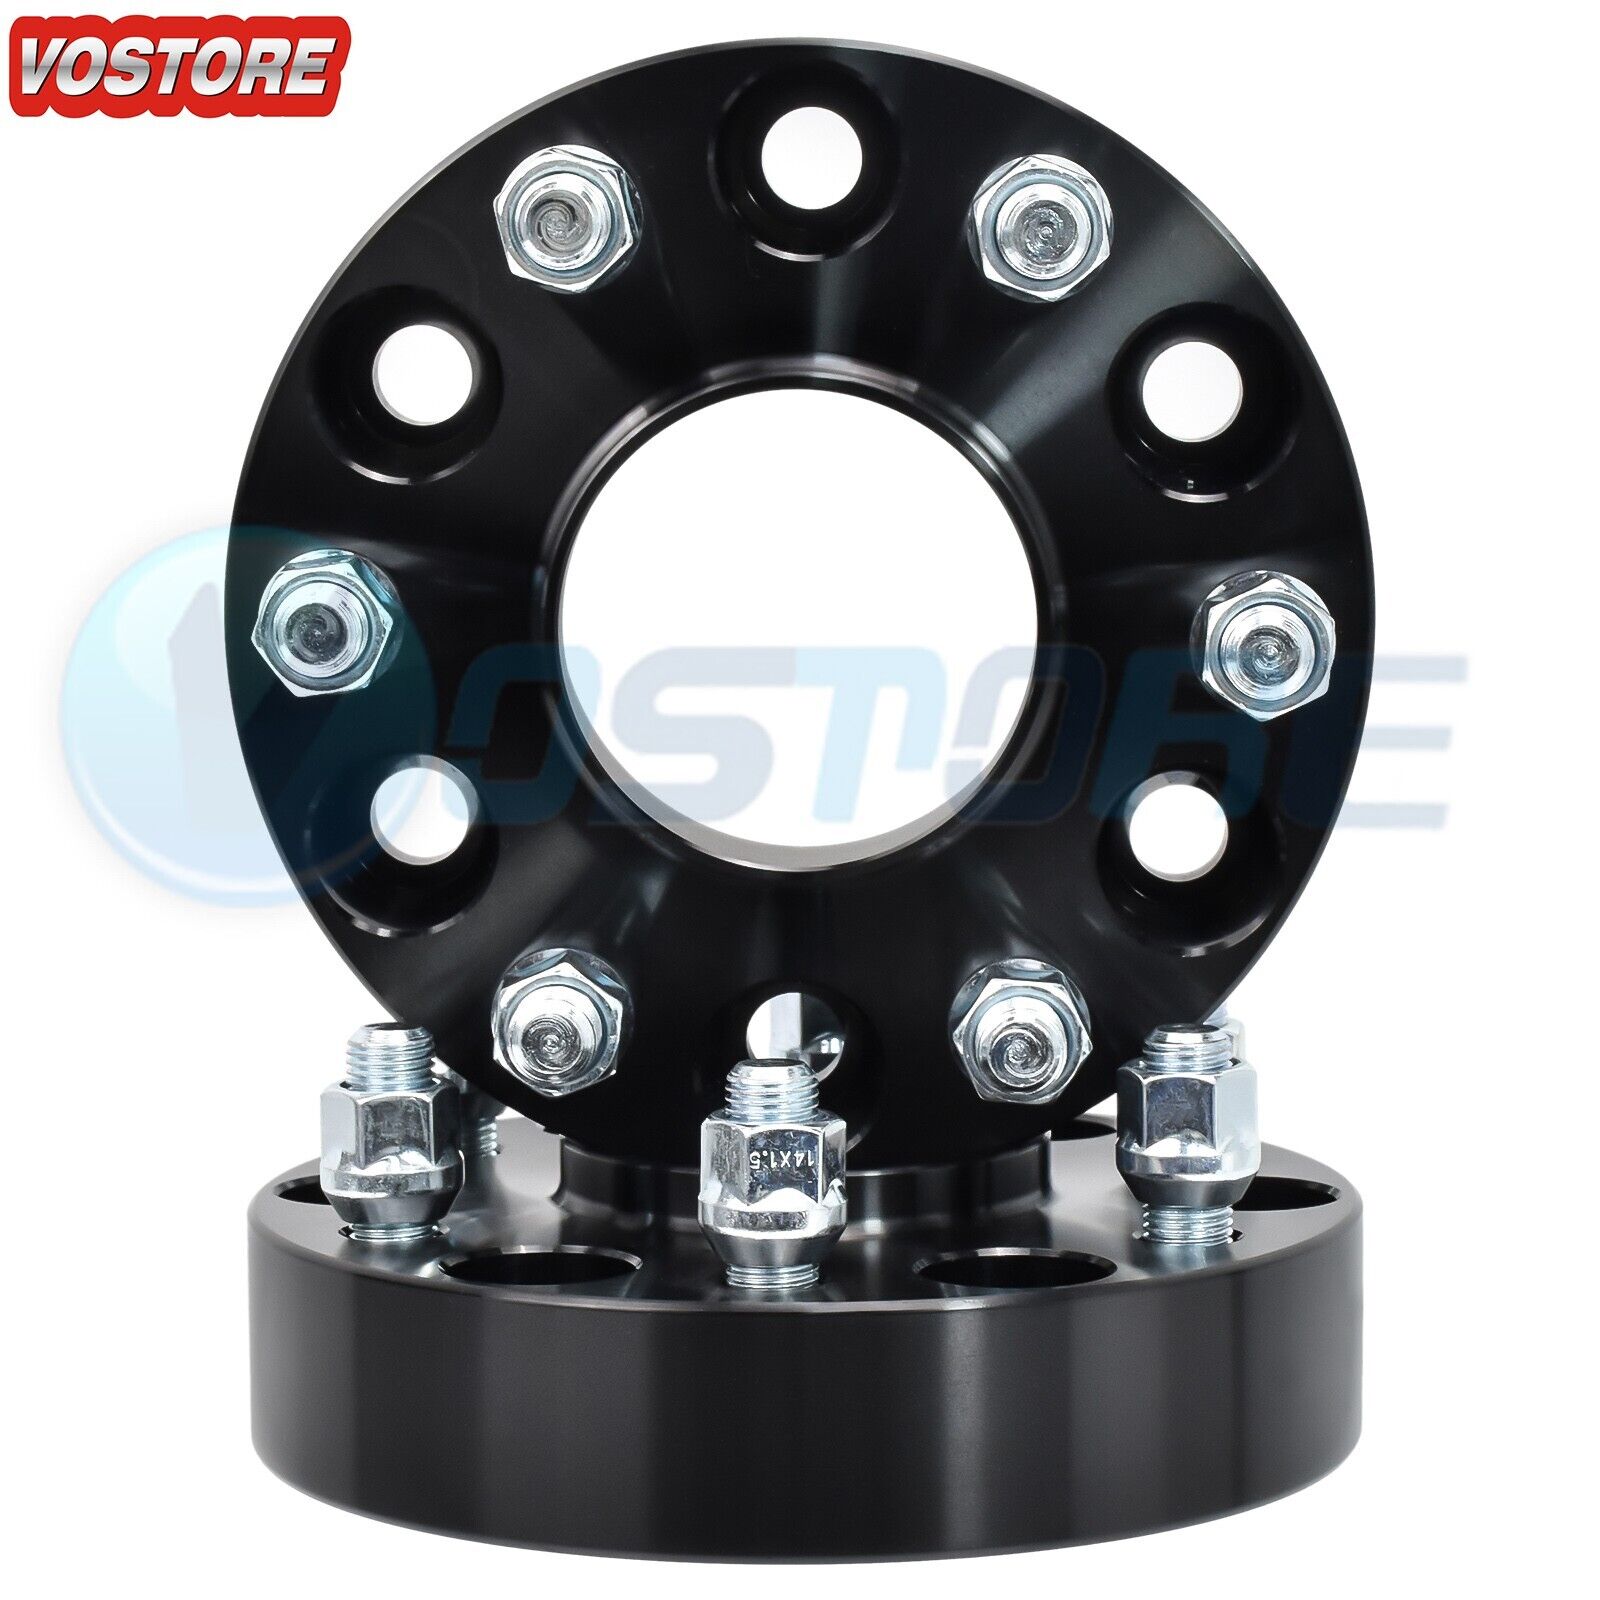 2x 1.5'' 6 Lug Black Hubcentric Wheel Spacers Adapters 6x5.5 fits Toyota Tacoma